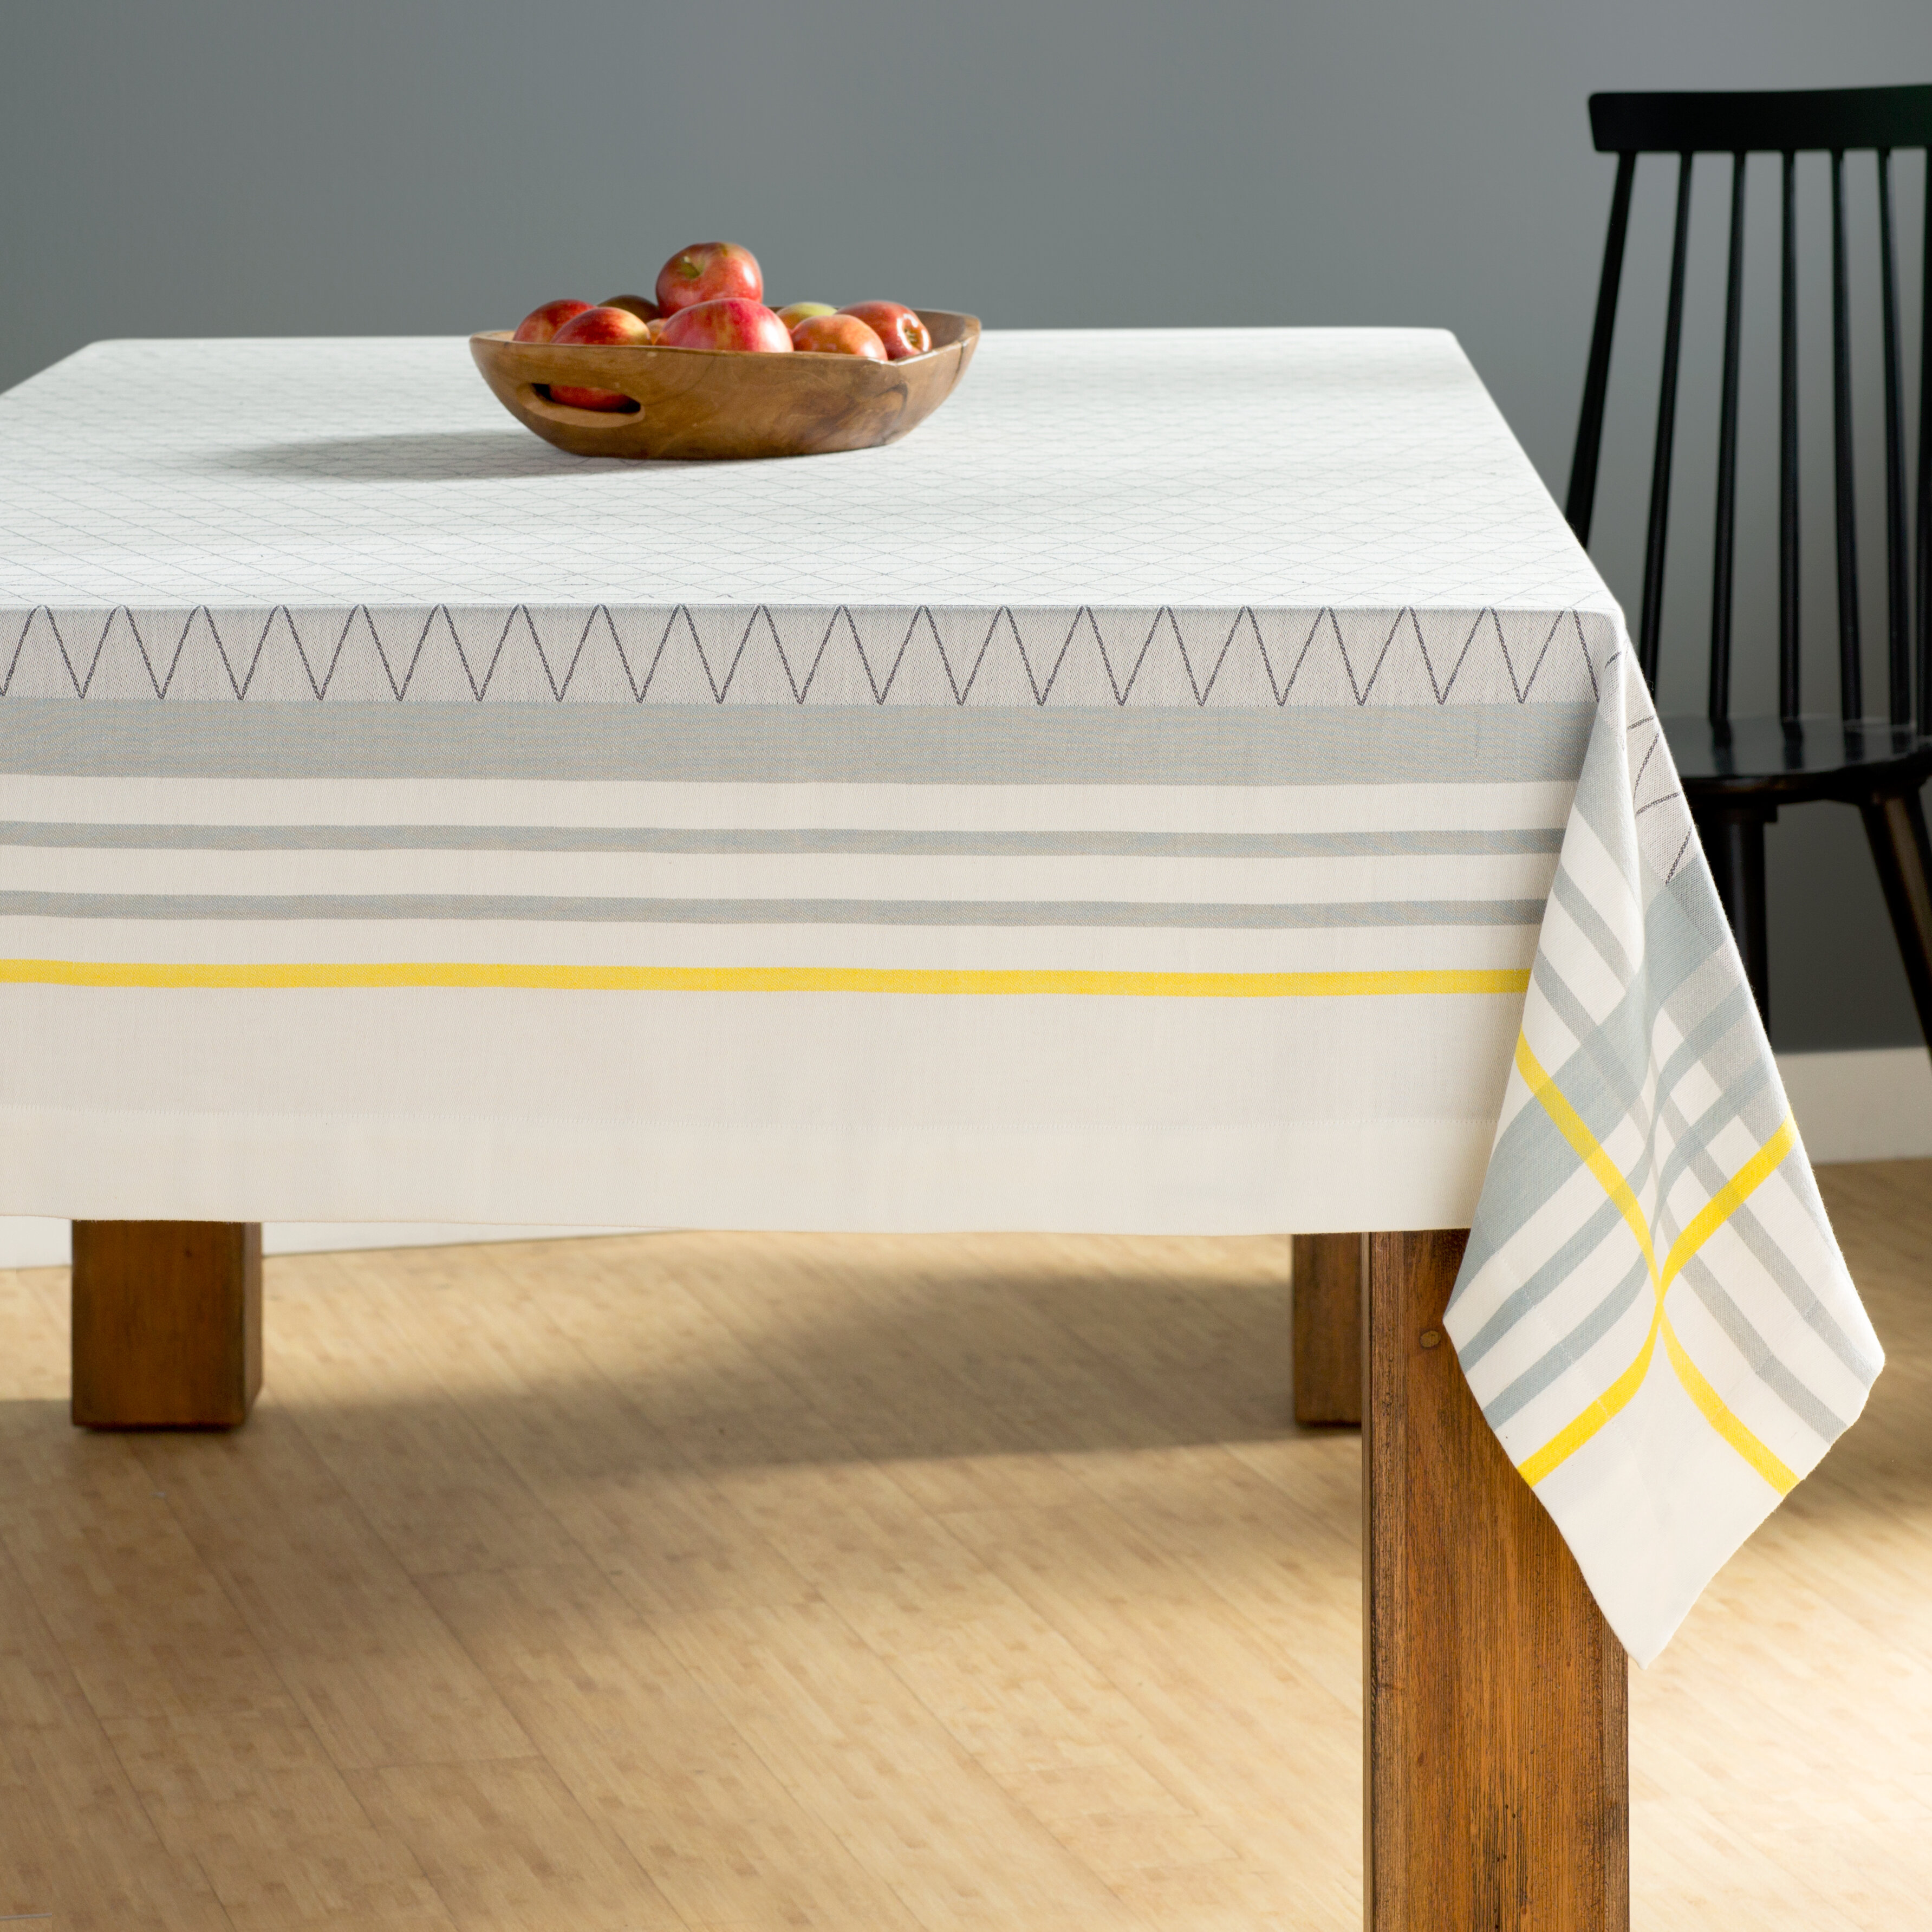 yellow and gray tablecloth